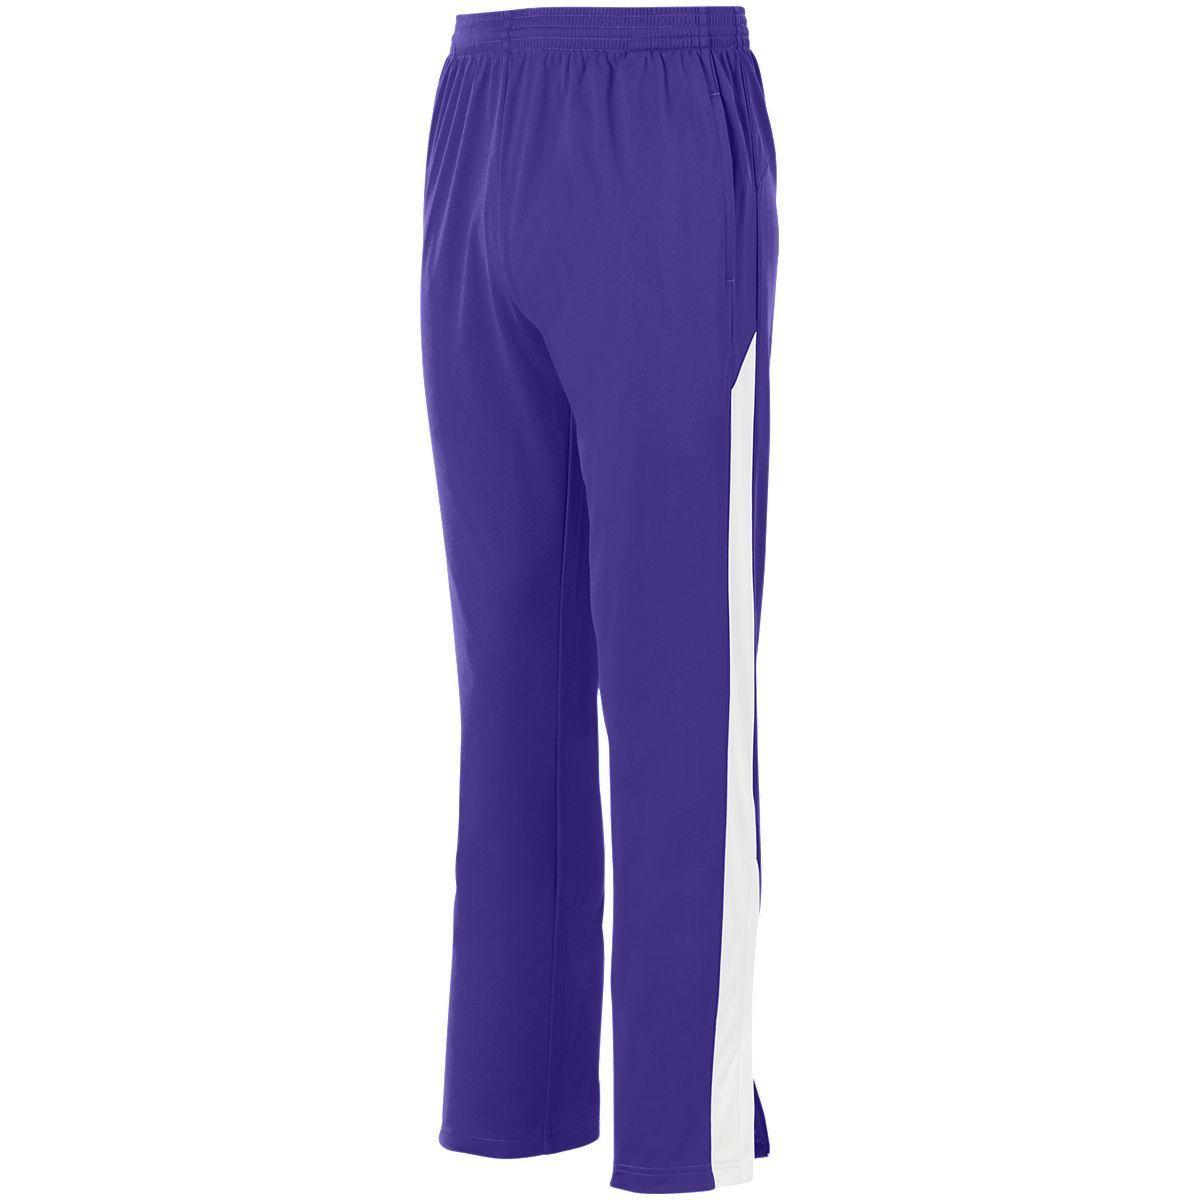 Augusta Sportswear Medalist Pant 2.0 in Purple/White  -Part of the Adult, Adult-Pants, Pants, Augusta-Products product lines at KanaleyCreations.com